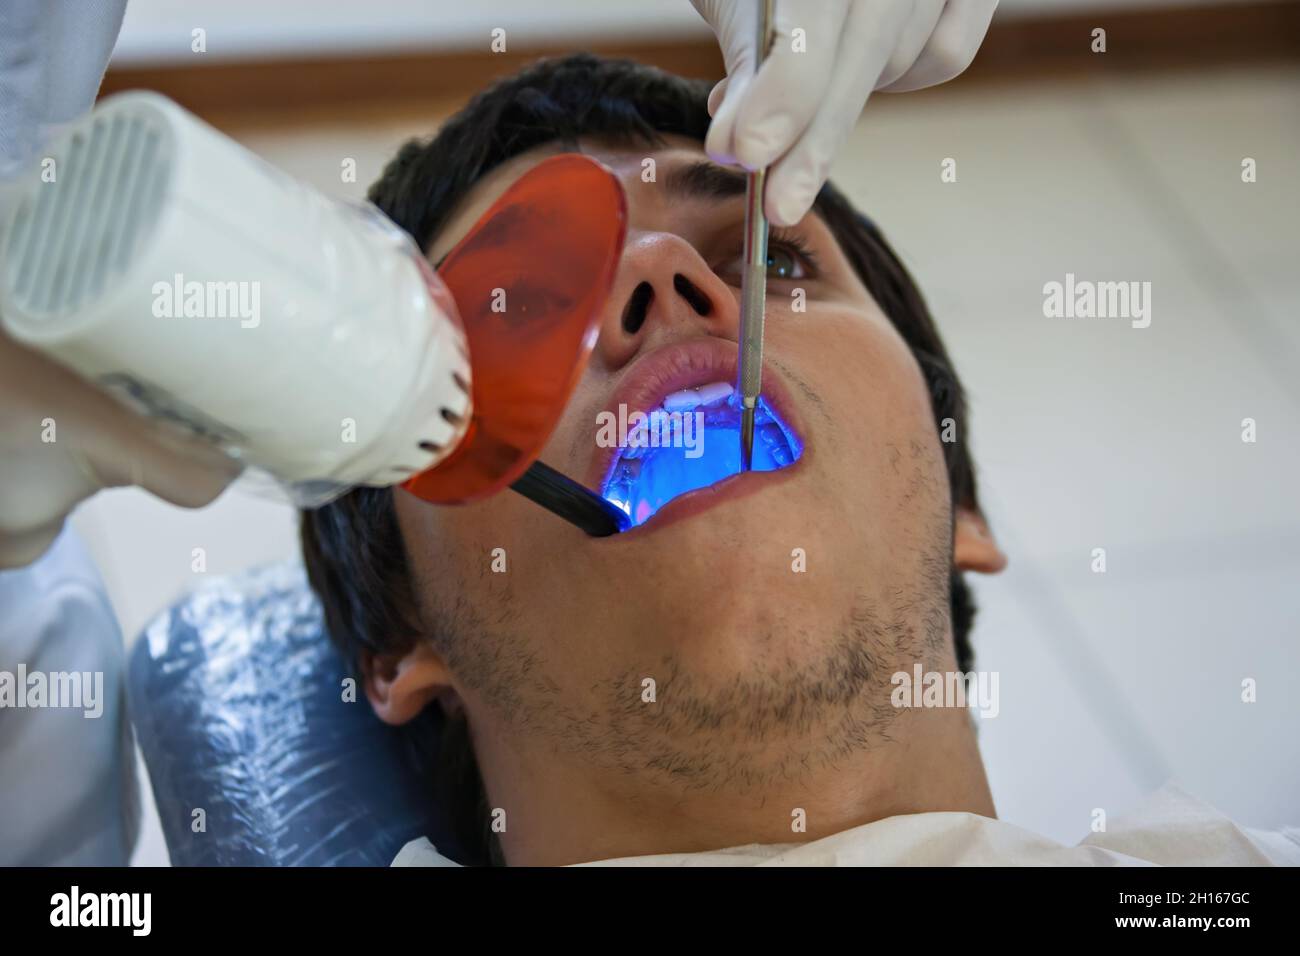 dentist ultraviolet light checking up the teeth of a young Caucasian man Stock Photo